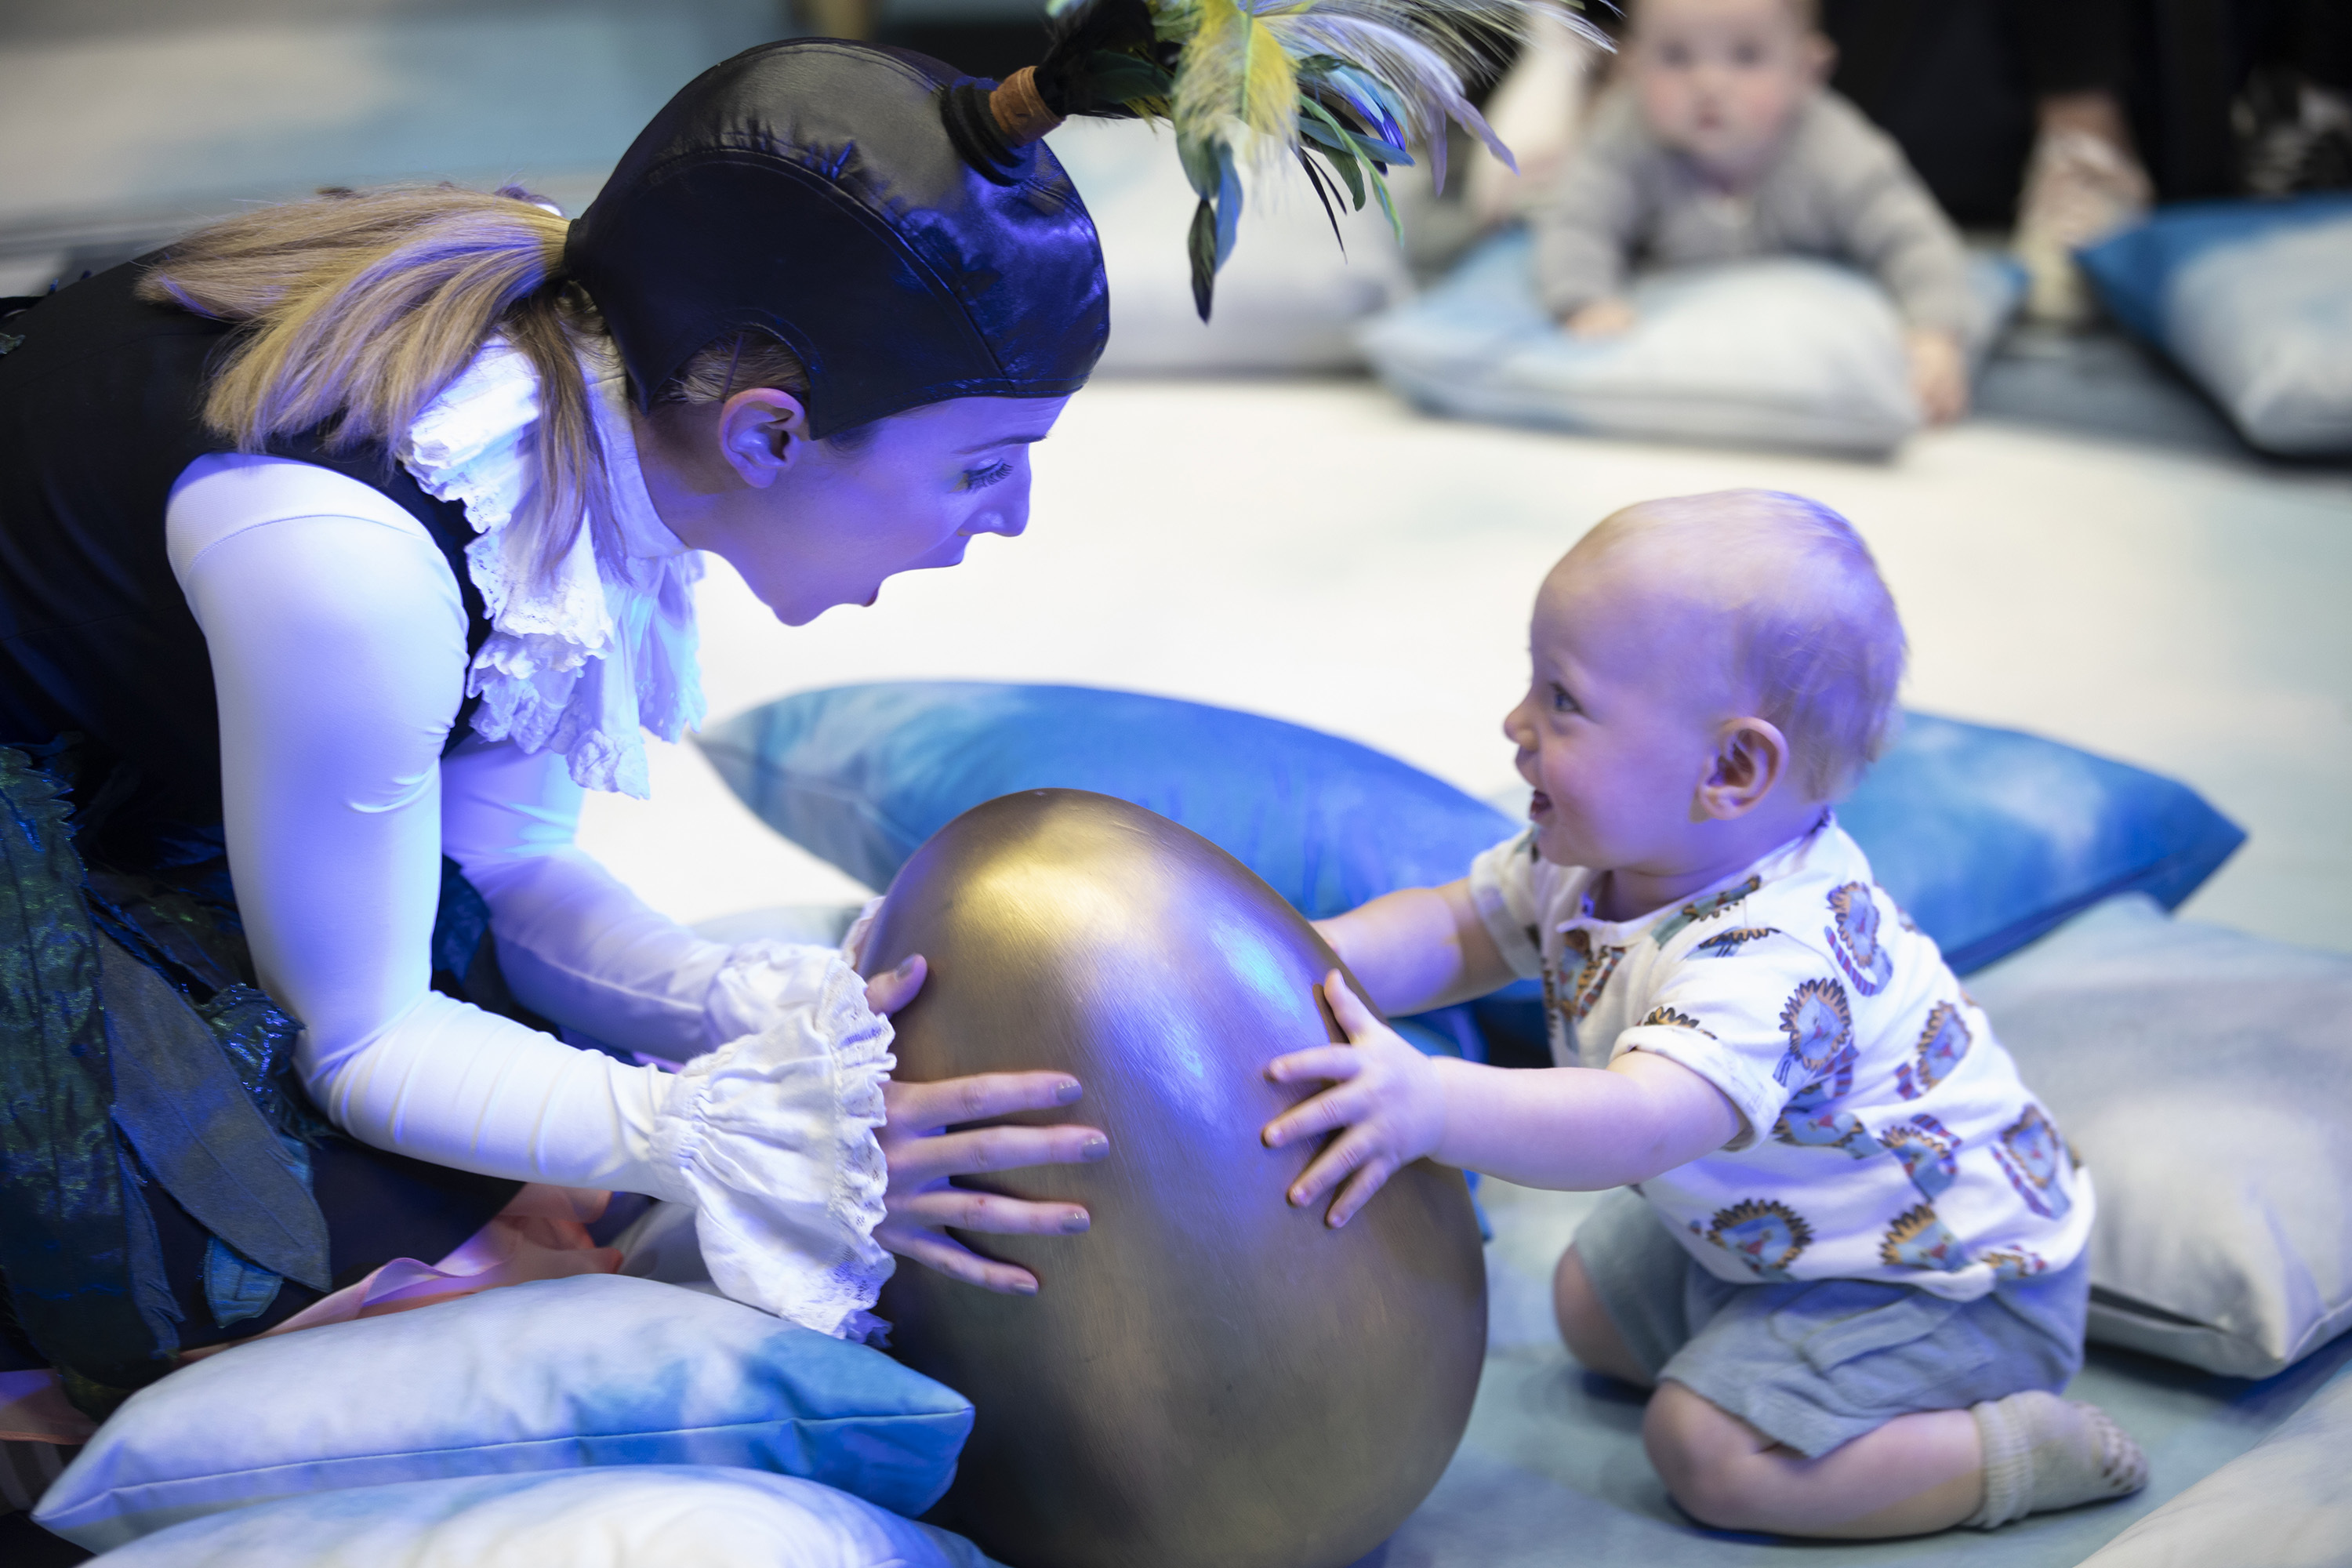 Babies can interact with the performers during the show (James Glossop)